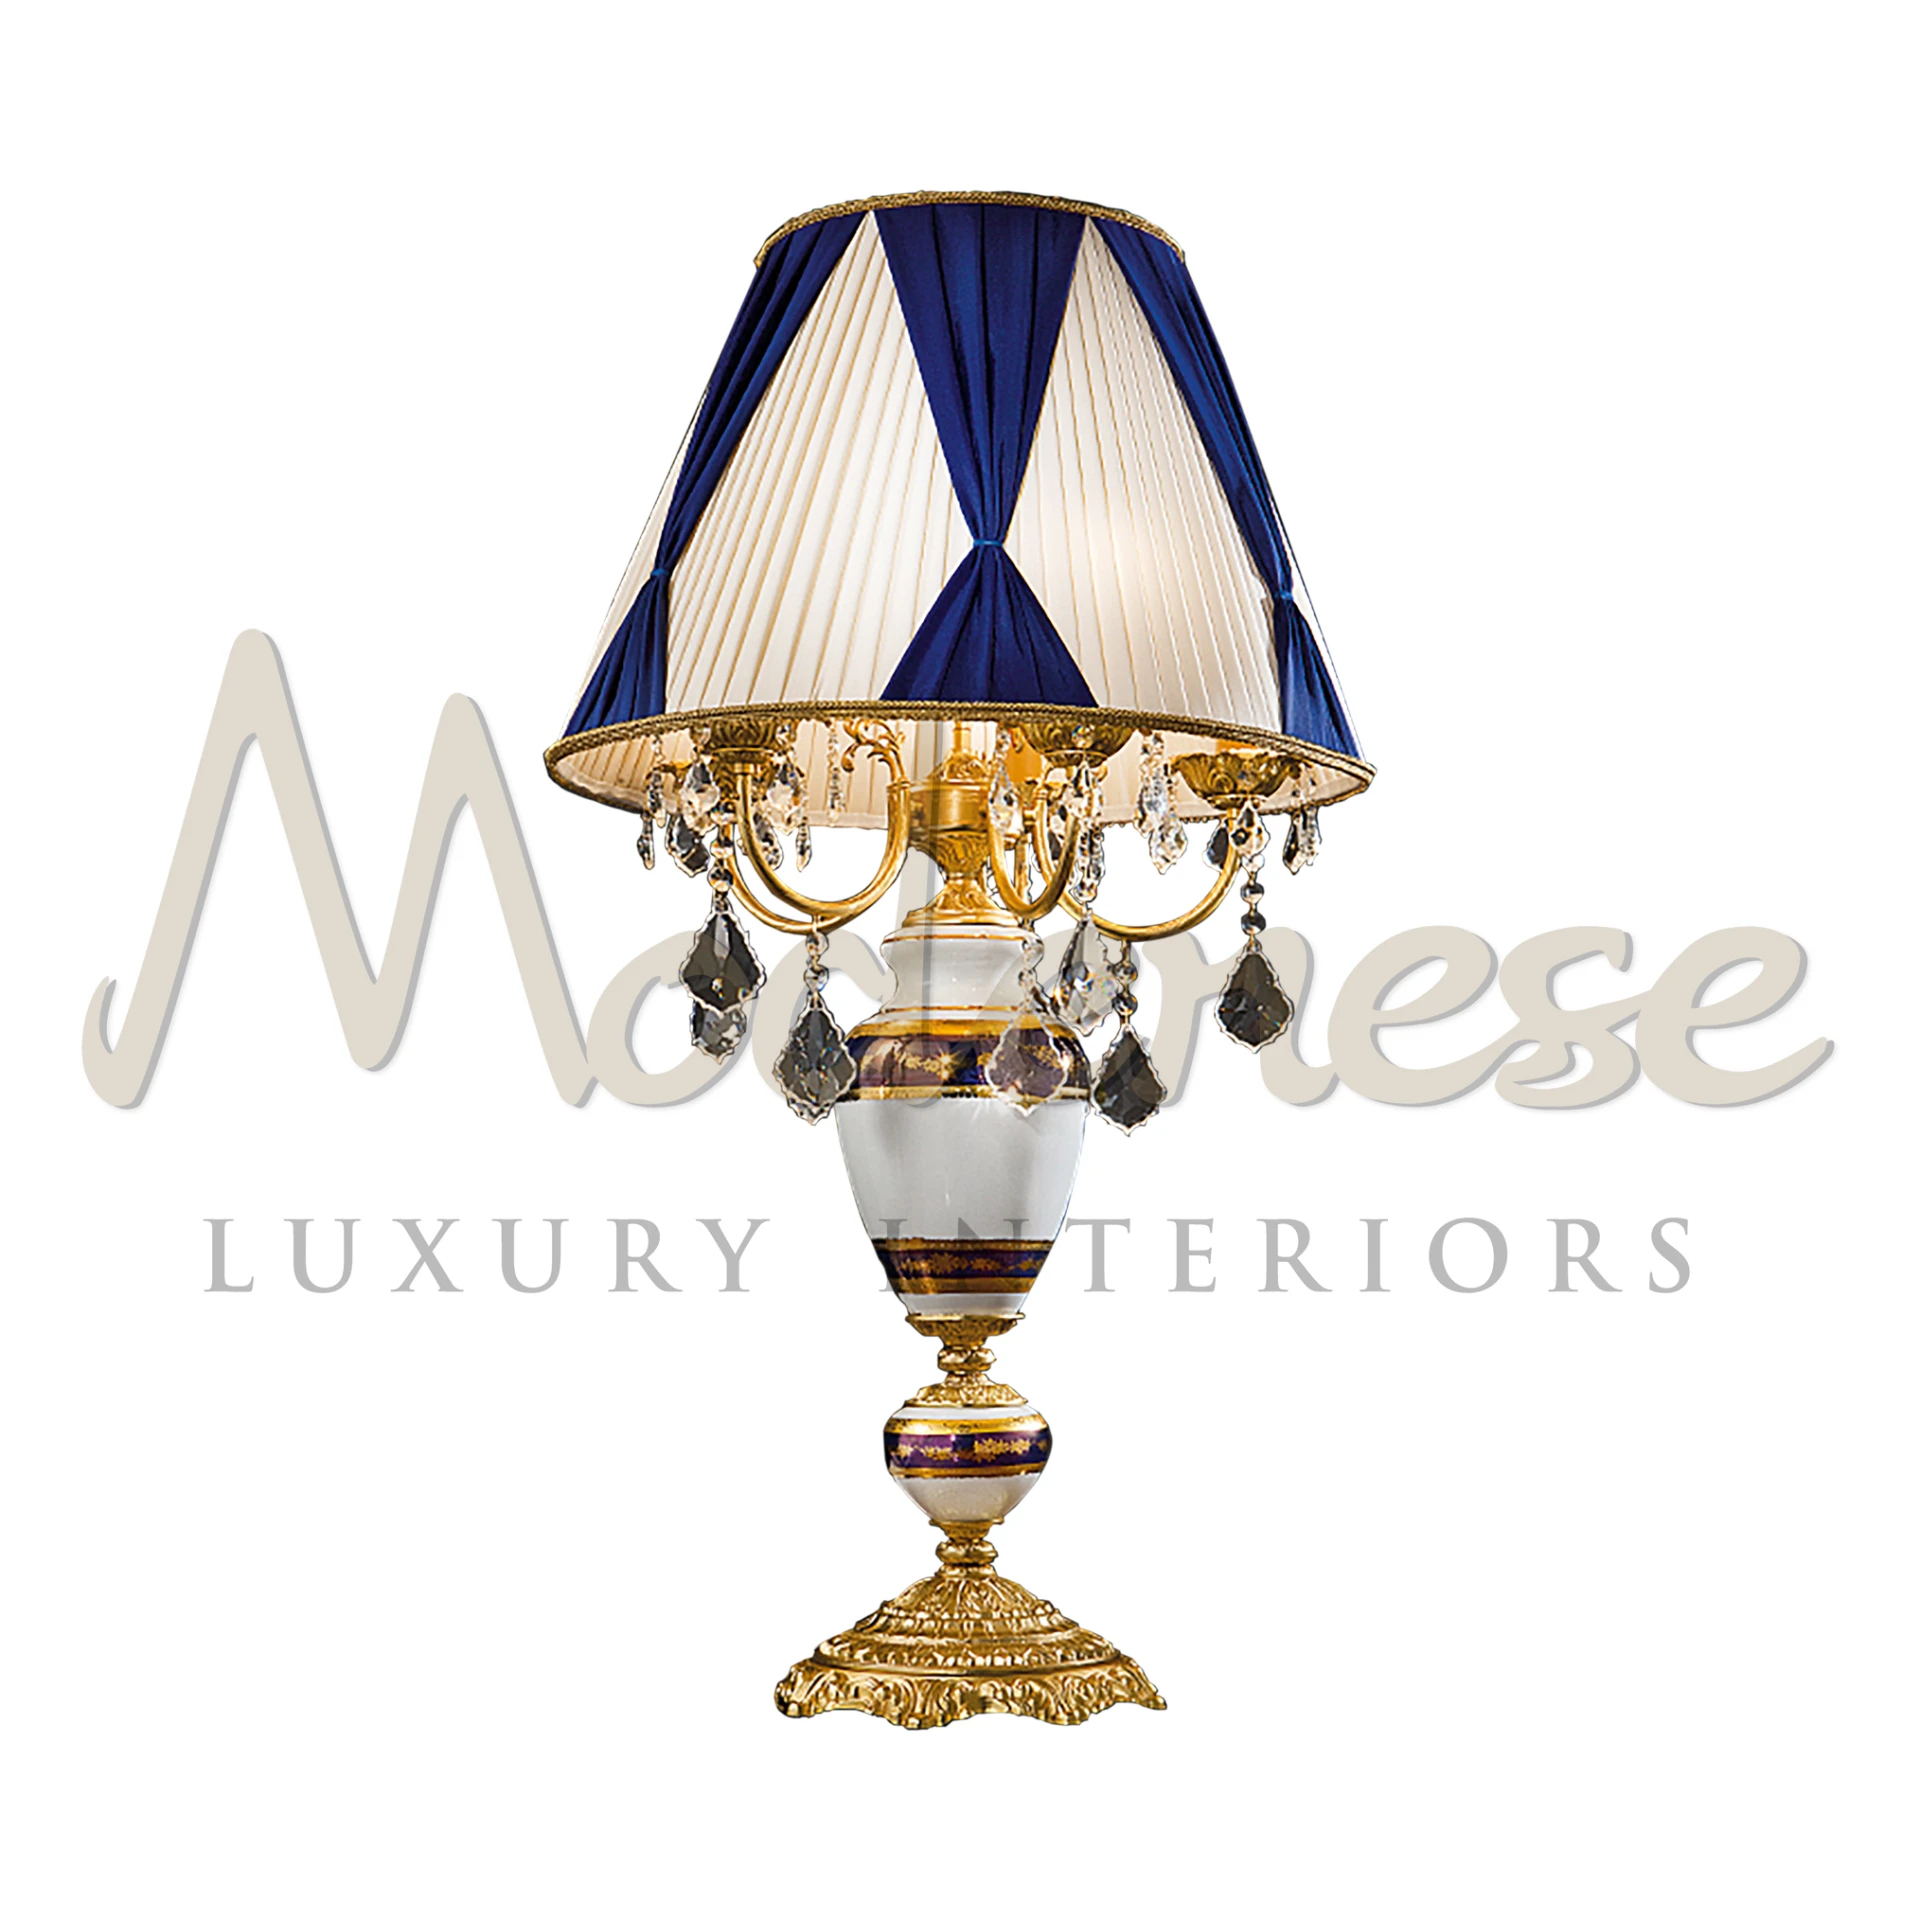 Royal Blue Table Lamp with gold accents and crystal droplets on a pleated shade